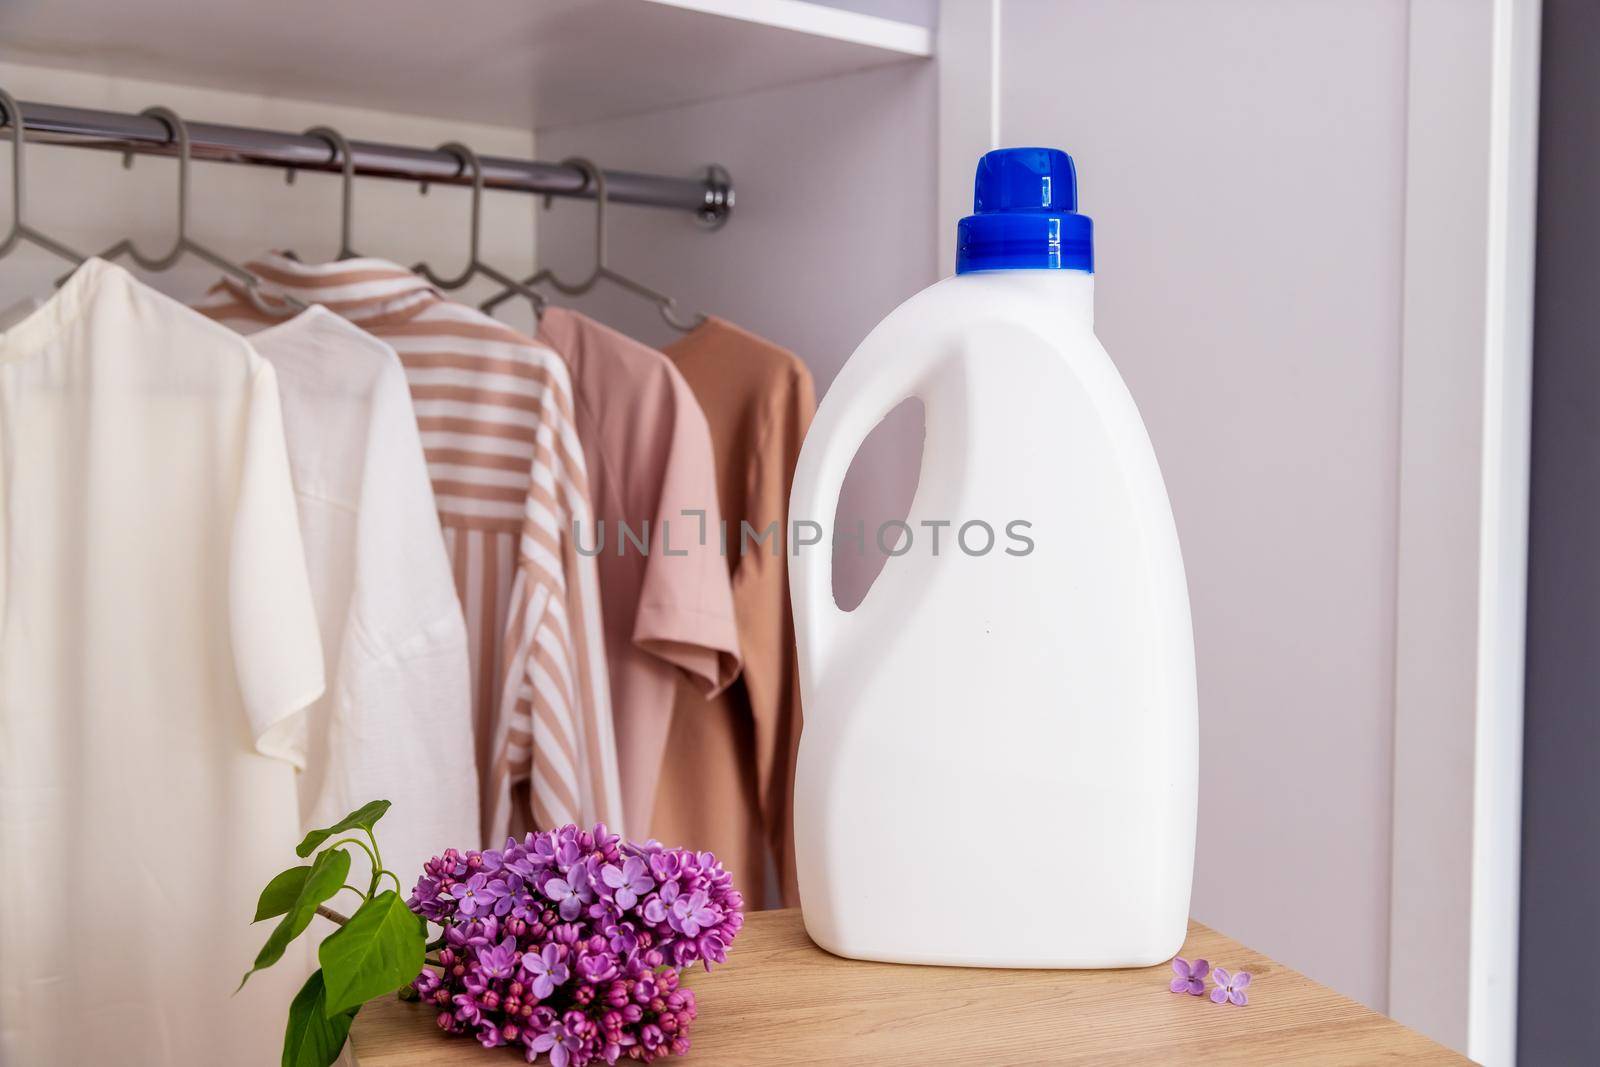 Eco Design Mockup of Empty Bottles Packing Laundry Detergent against Closet Background with Clothes in Neutral Colors. Place for text. Bio organic product. Lilac branch, fresh scent